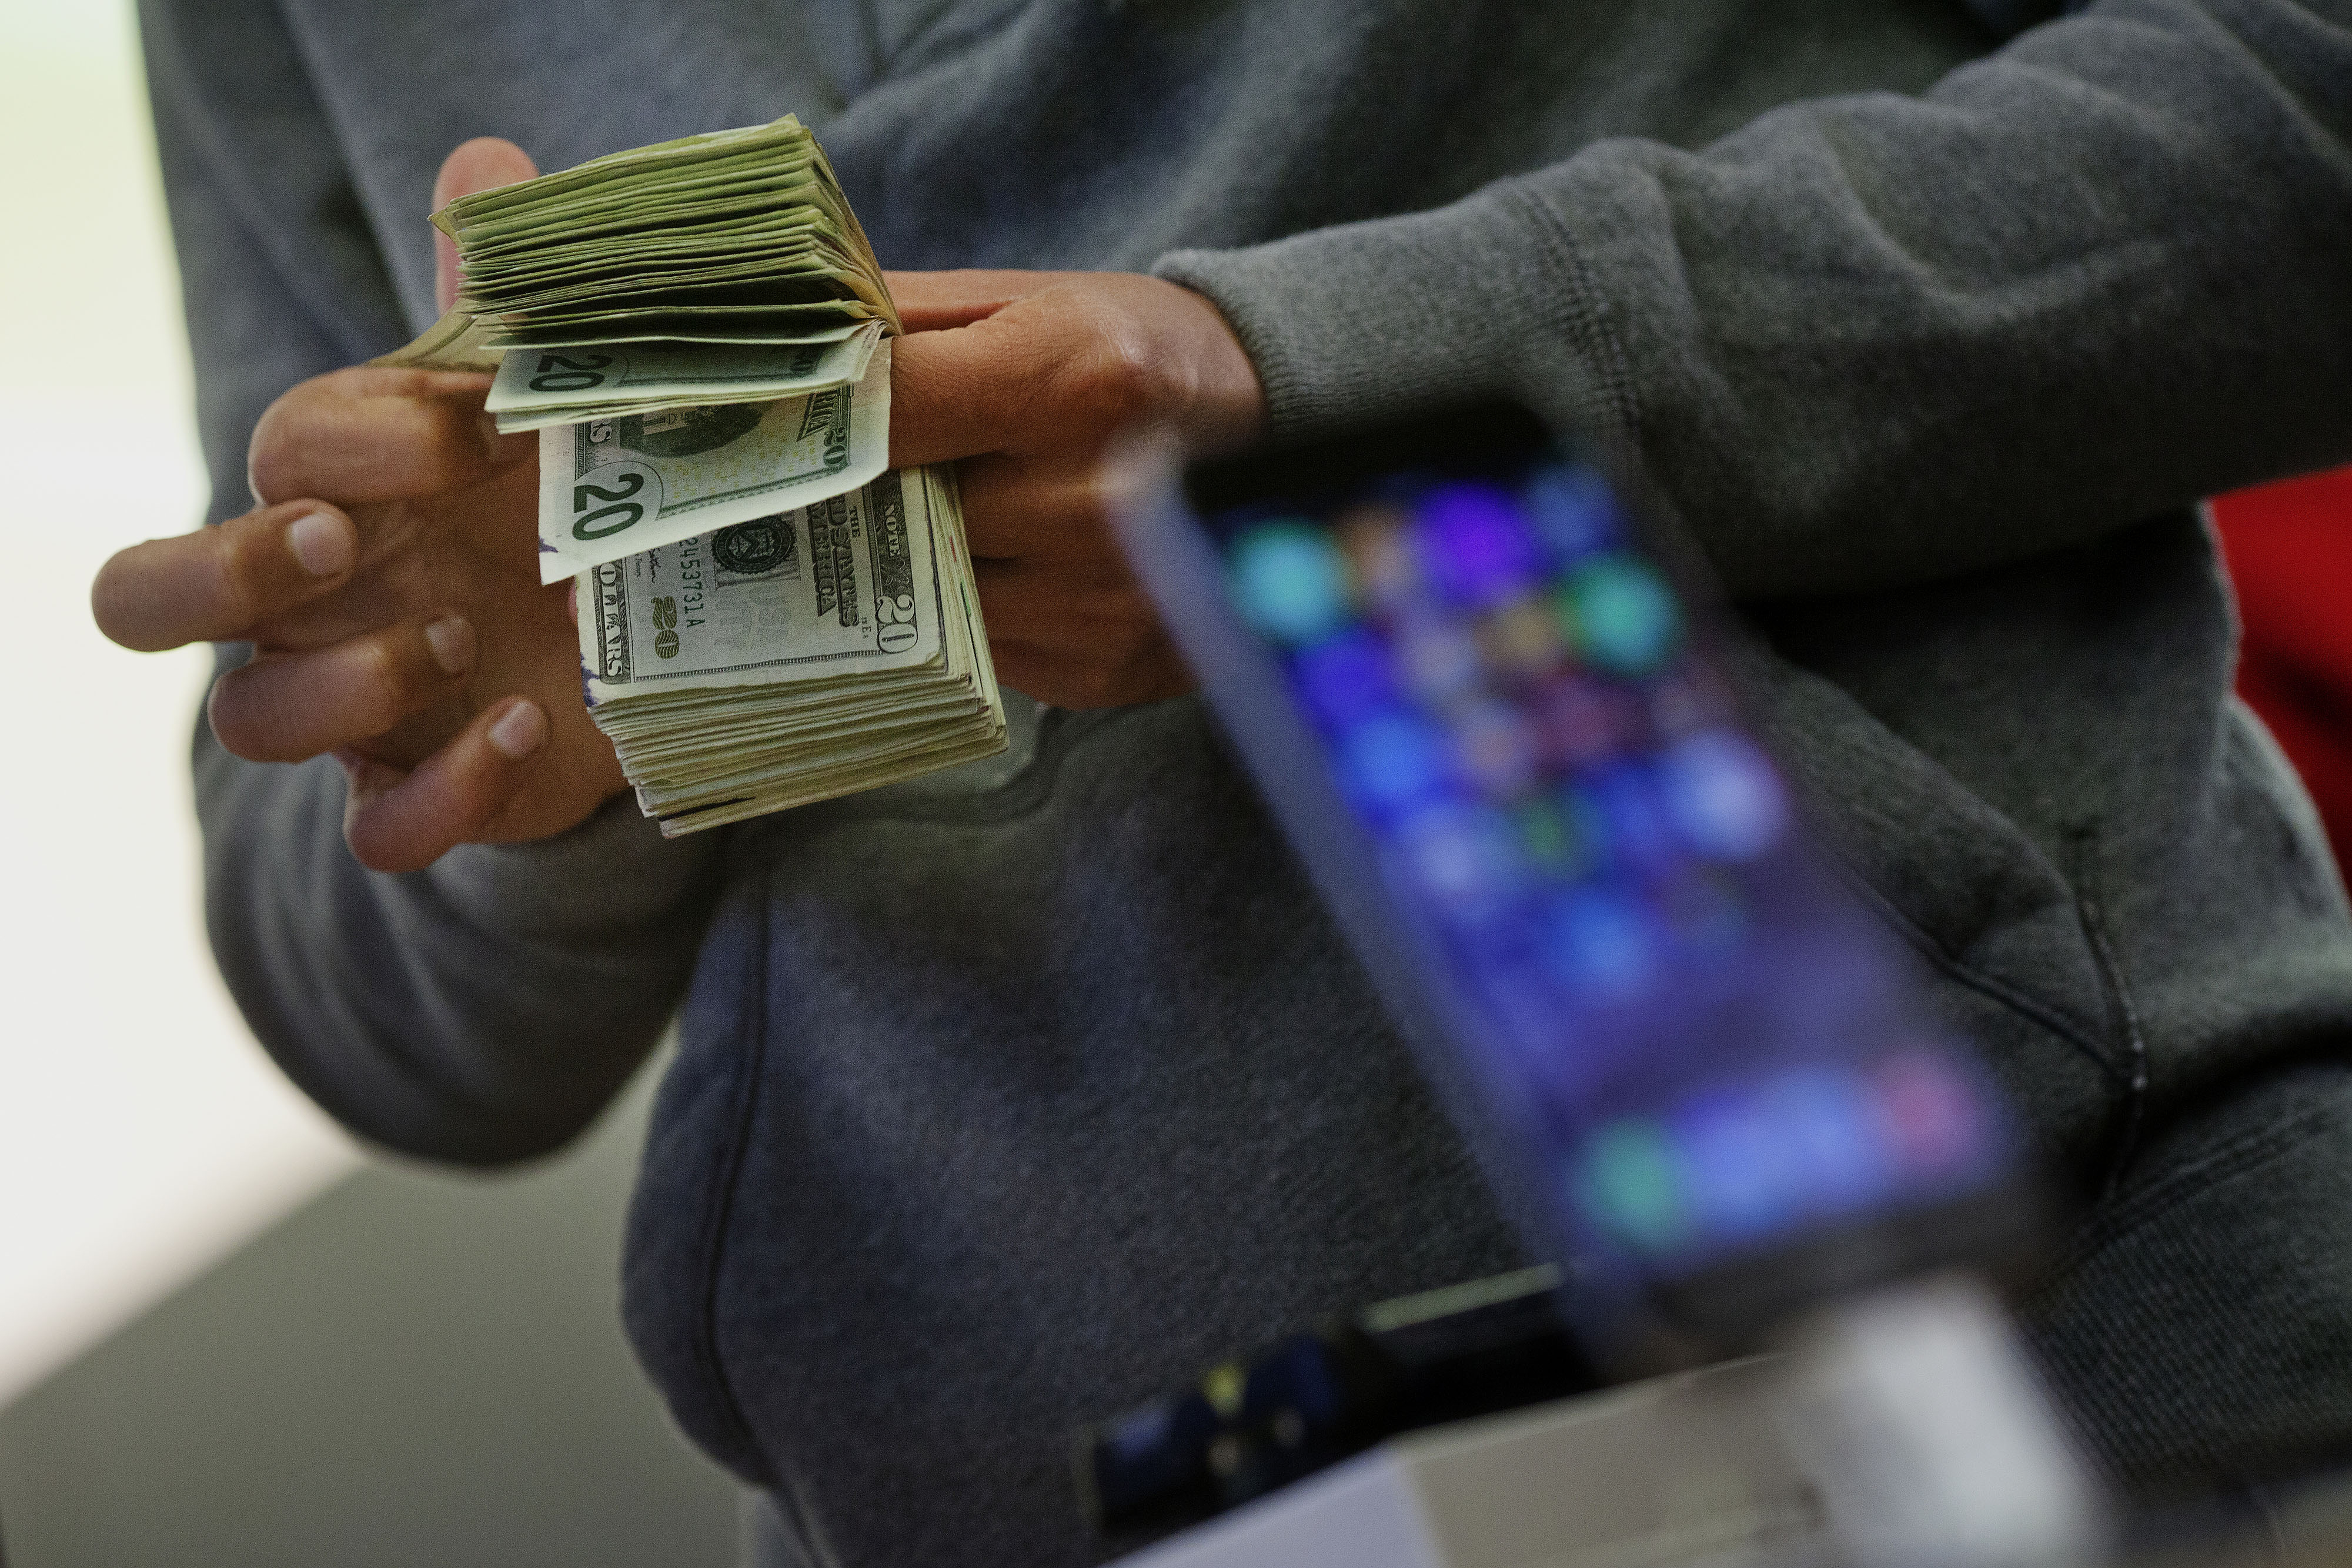 A customer counts cash to pay for two iPhone 6 smartphones during the sales launch at the Apple Inc. store in New York, U.S., on Friday, Sept. 19, 2014. (Bloomberg&mdash;Bloomberg via Getty Images)